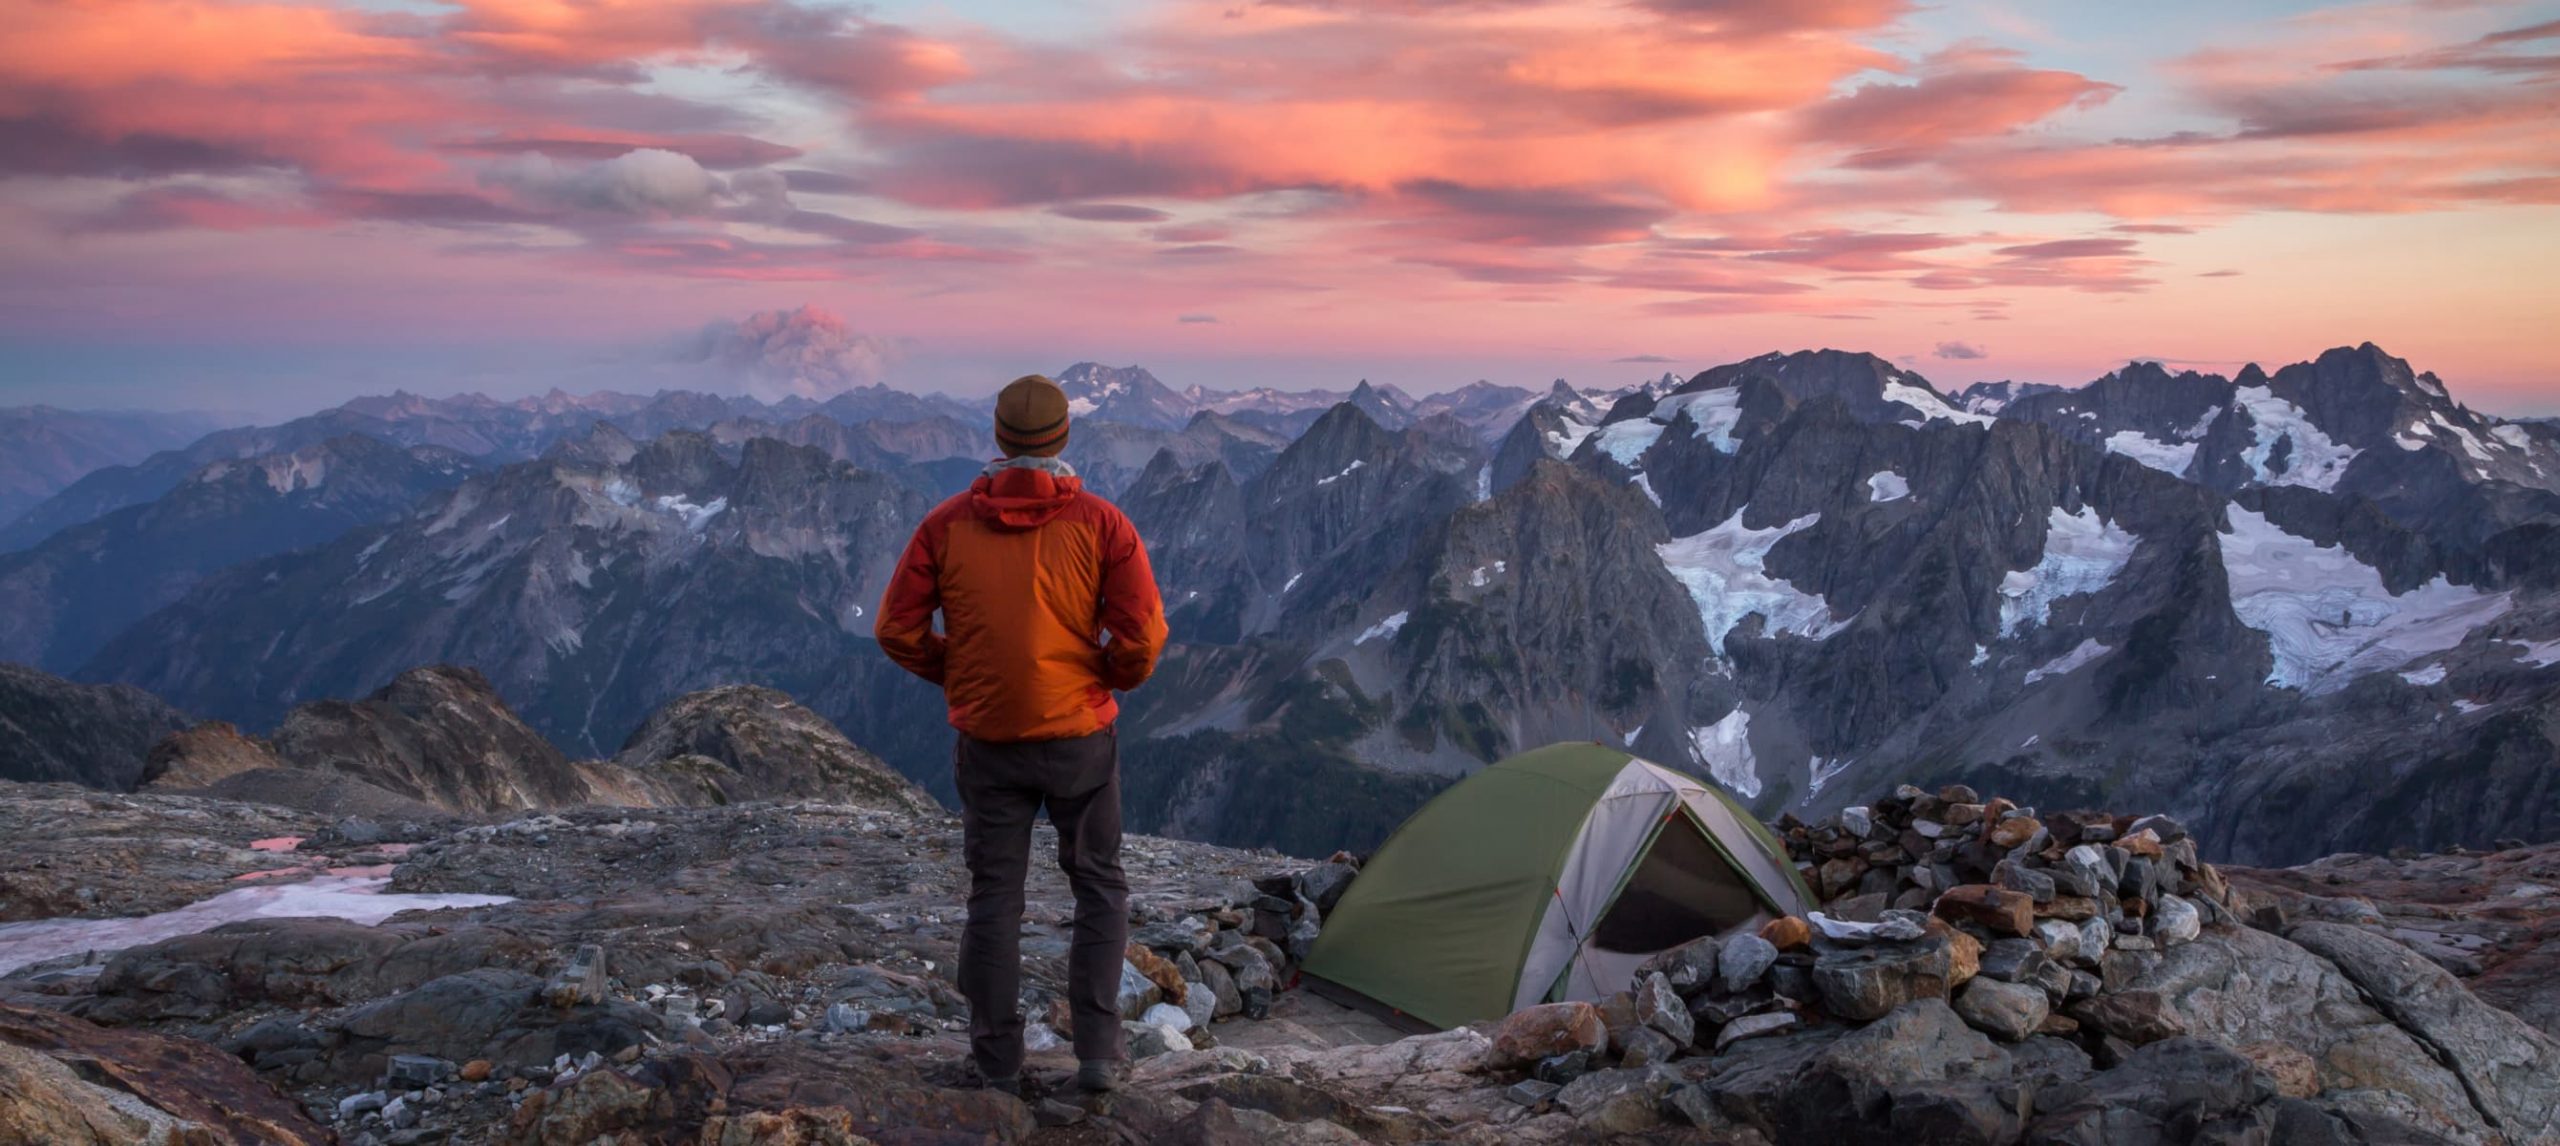 Hiker at sunset in North Cascades National Park, USA